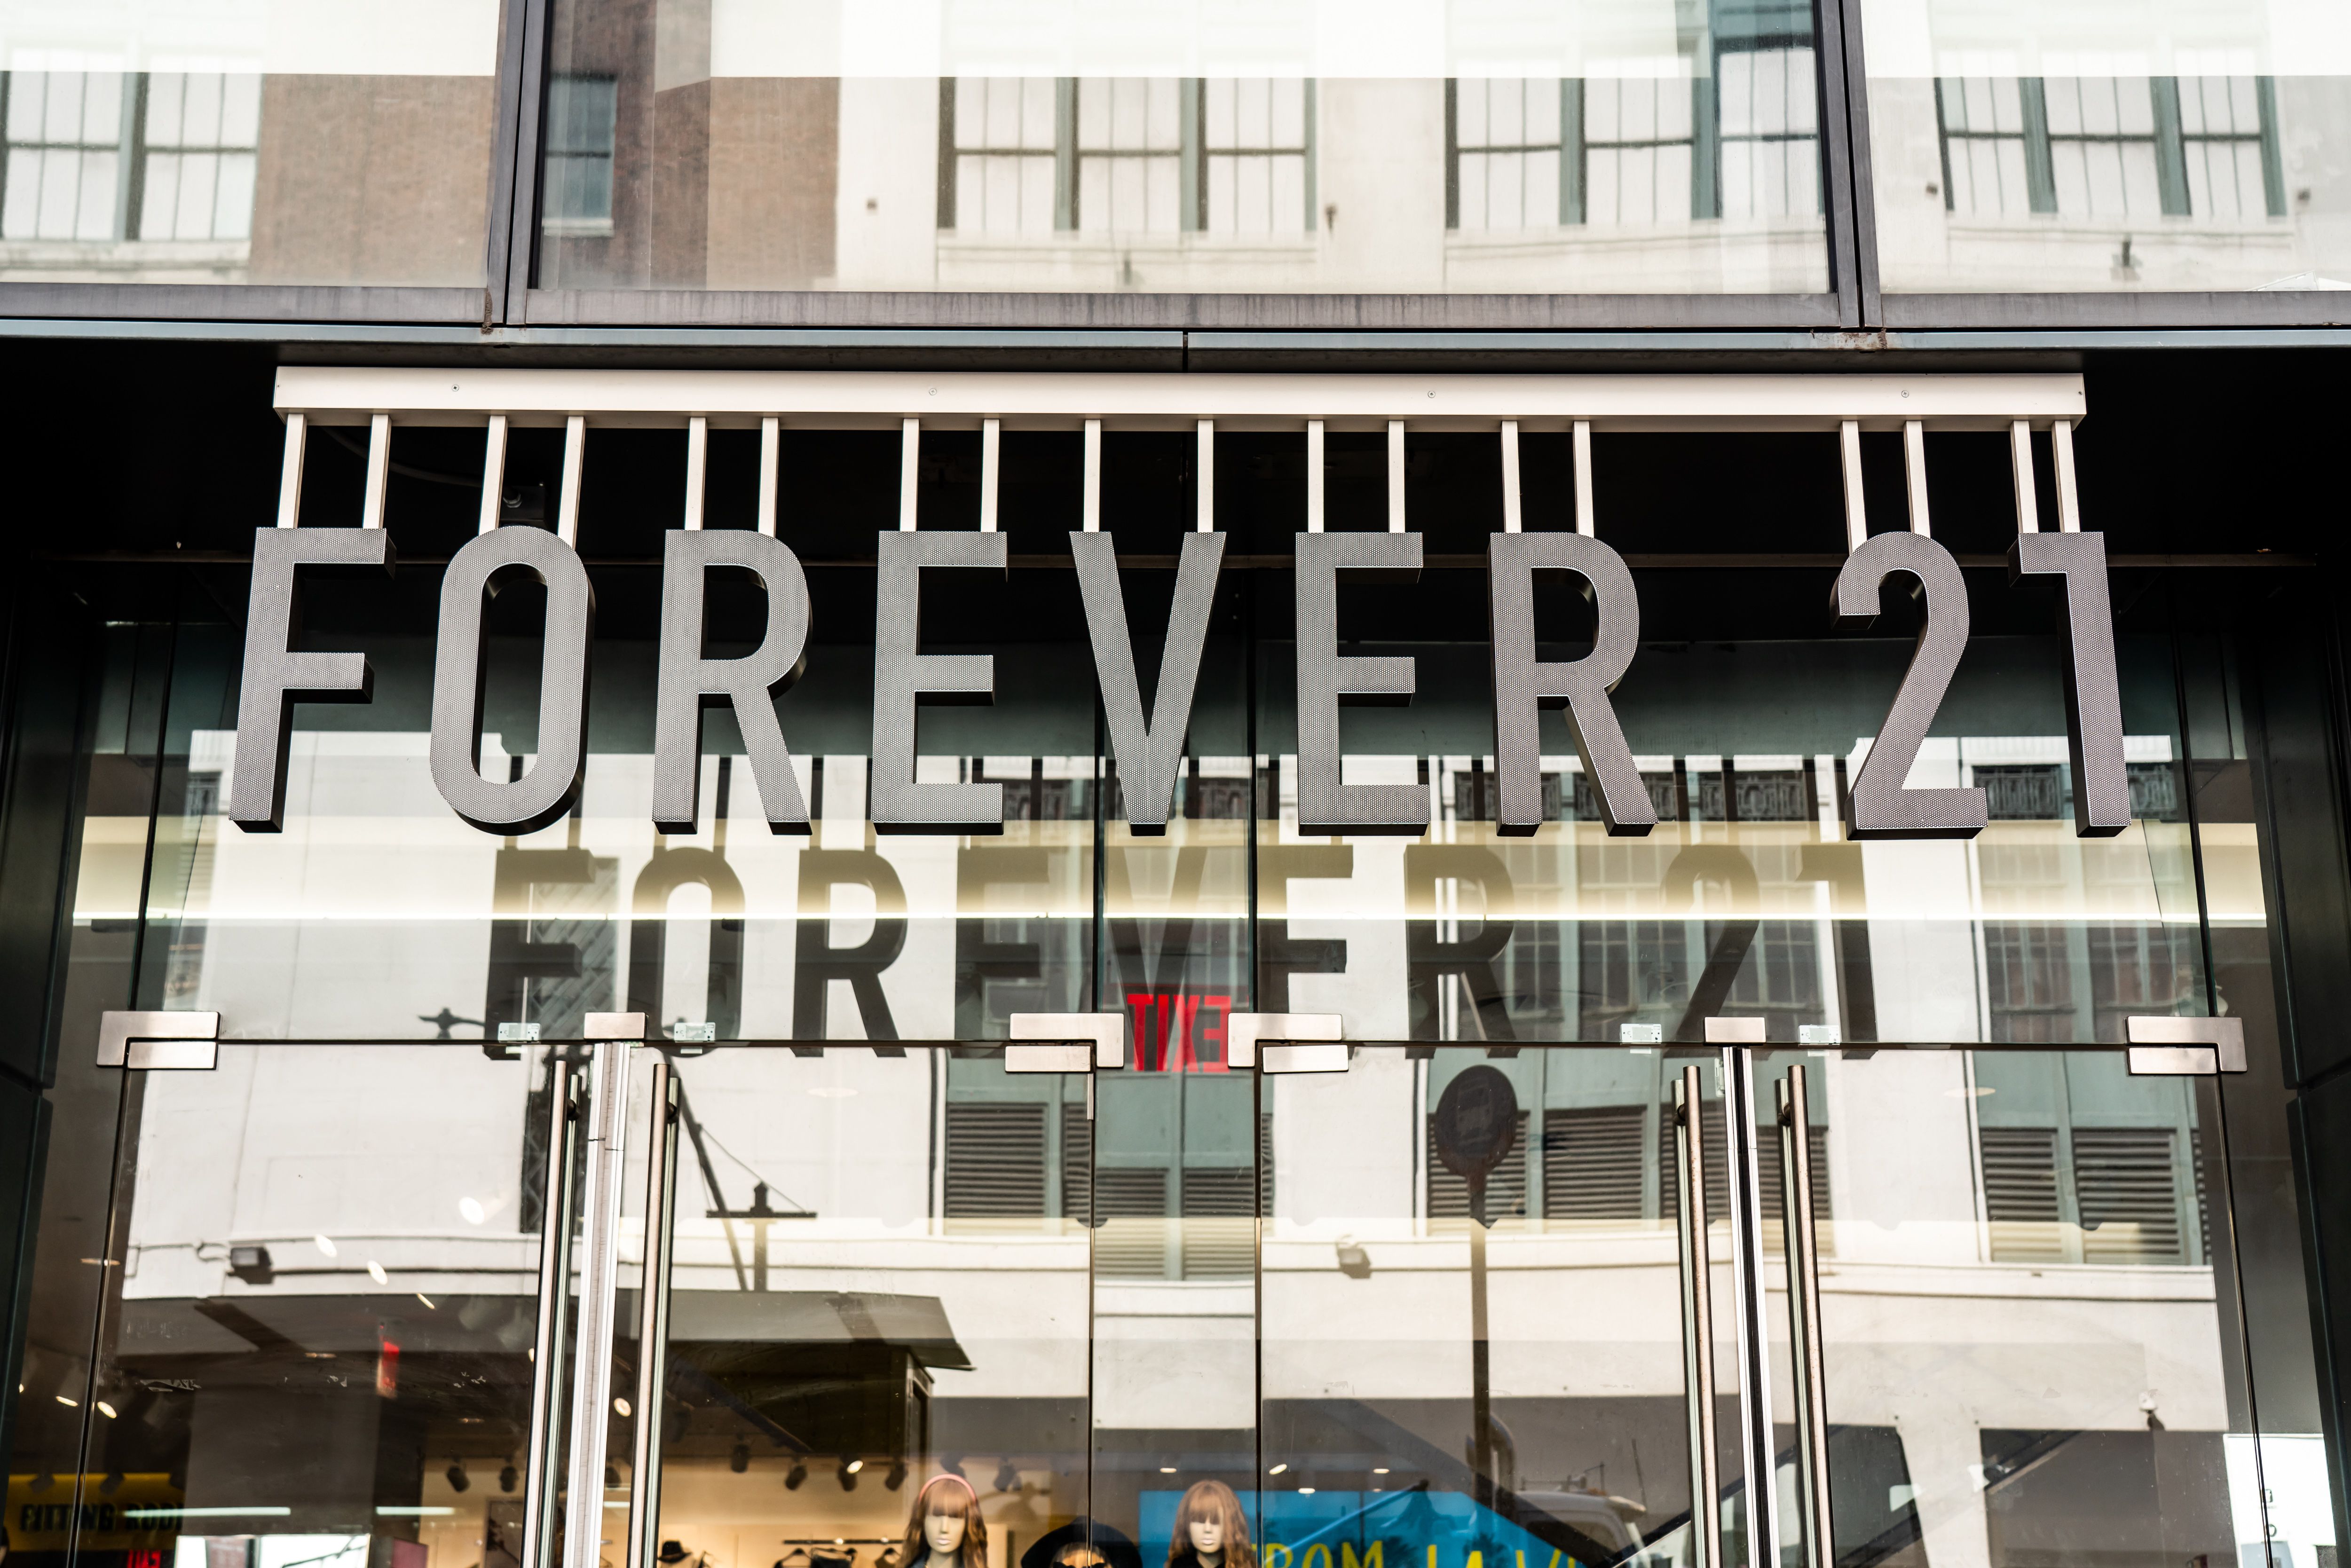 New Forever 21 CEO plots post-bankruptcy comeback with physical